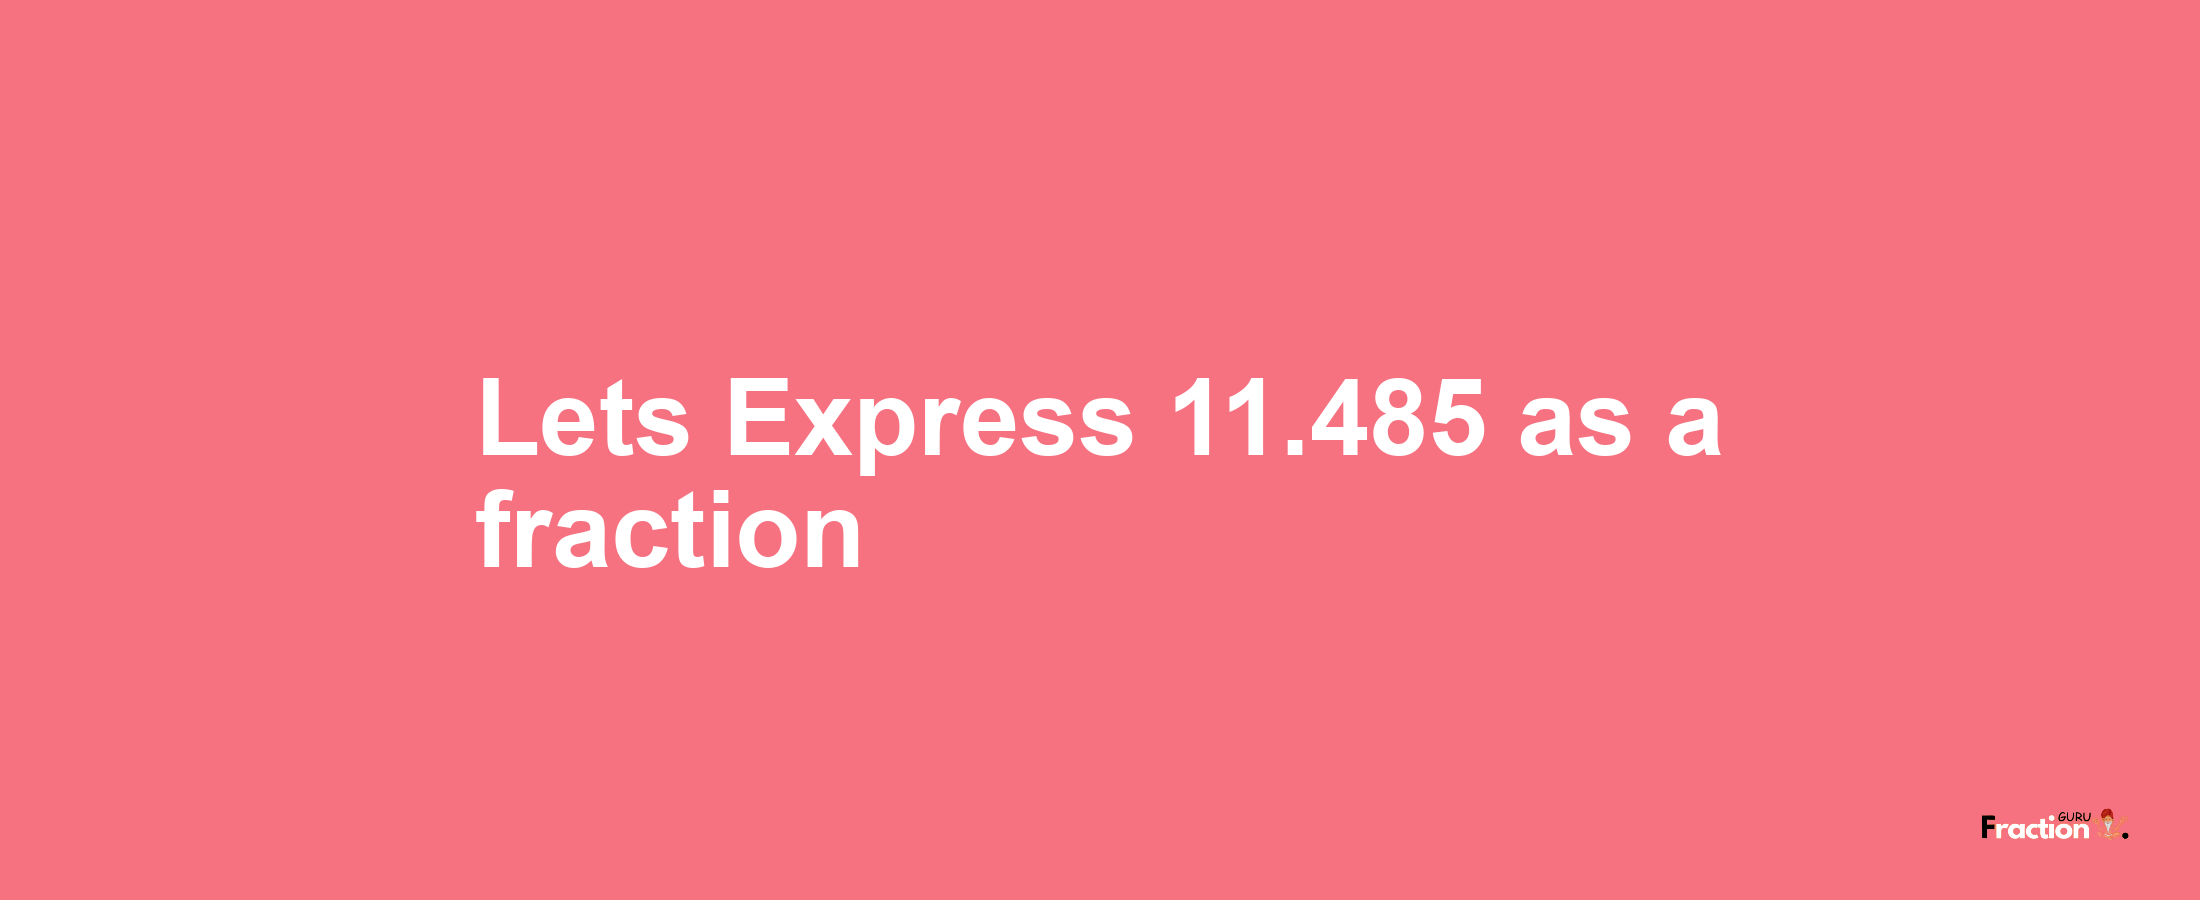 Lets Express 11.485 as afraction